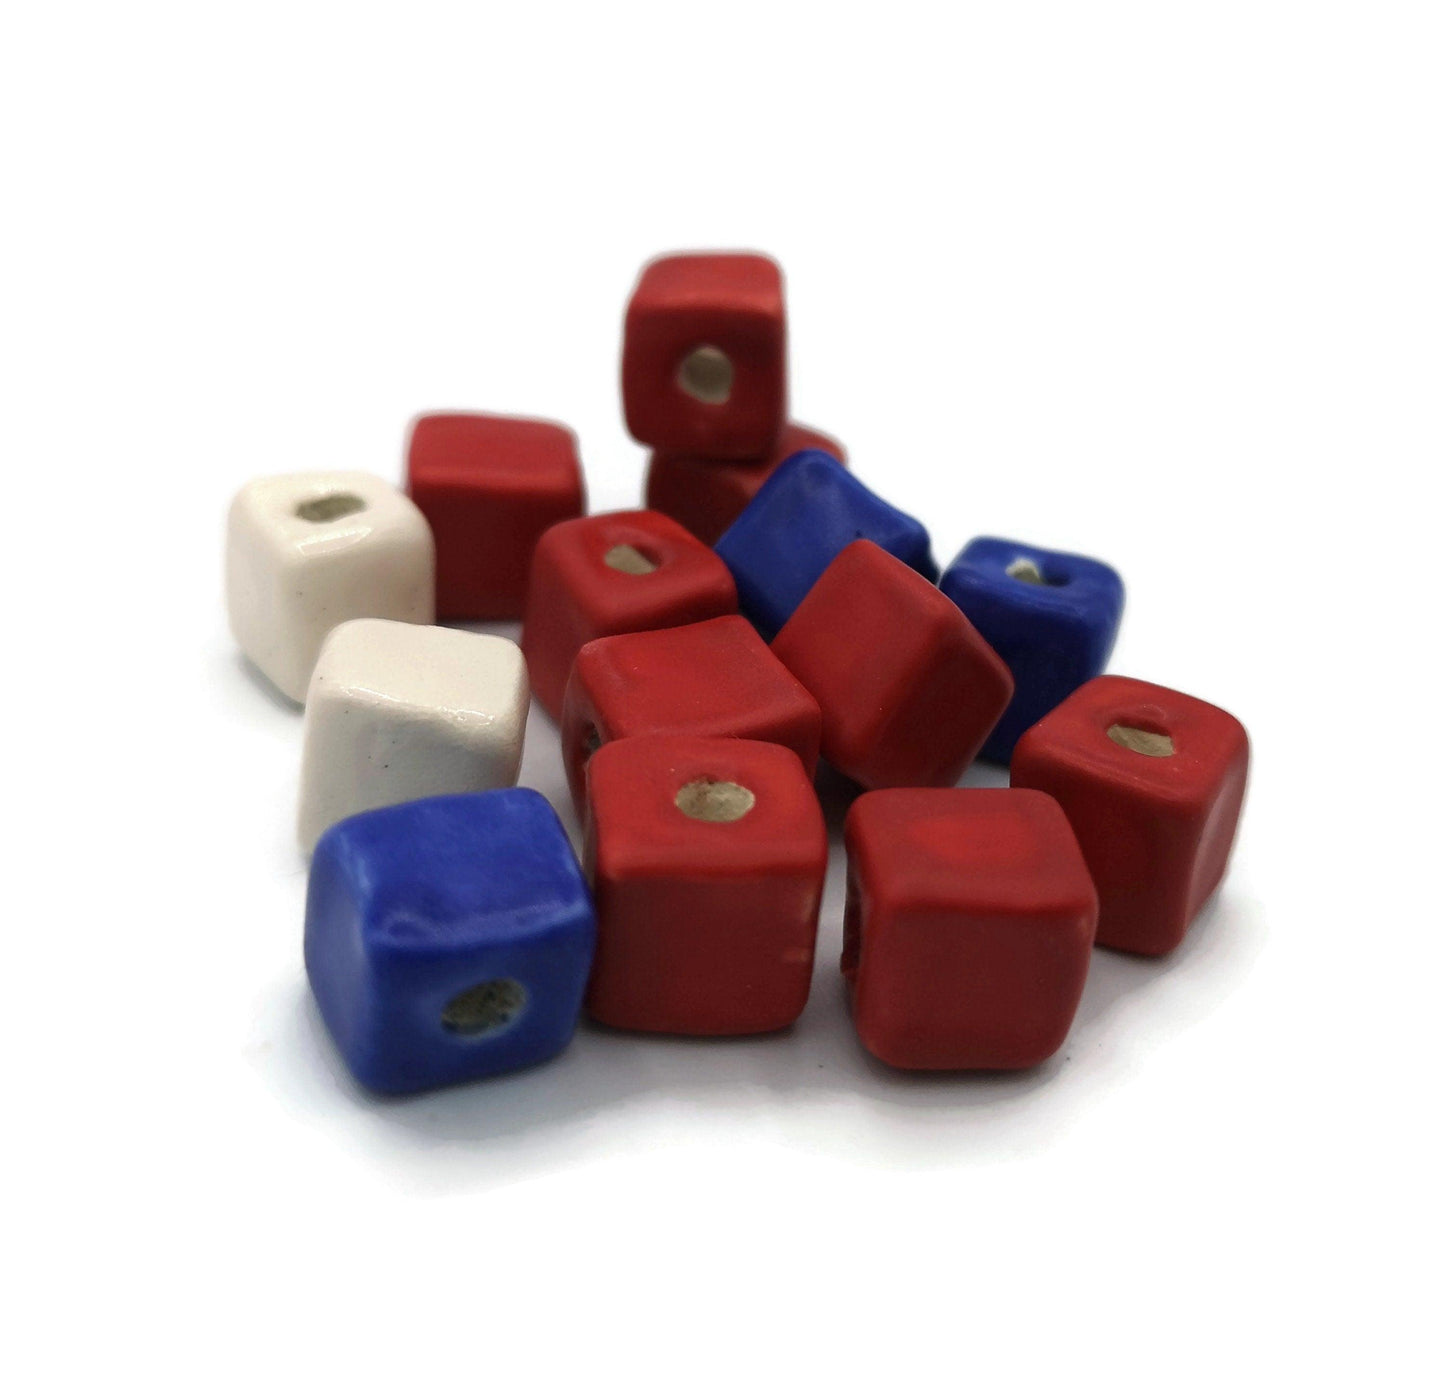 14 Pc Square Ceramic Beads Set, Assorted Royal Blue Red And White Porcelain Beads 10mm, Handmade Clay Jewelry Making Beads - Ceramica Ana Rafael